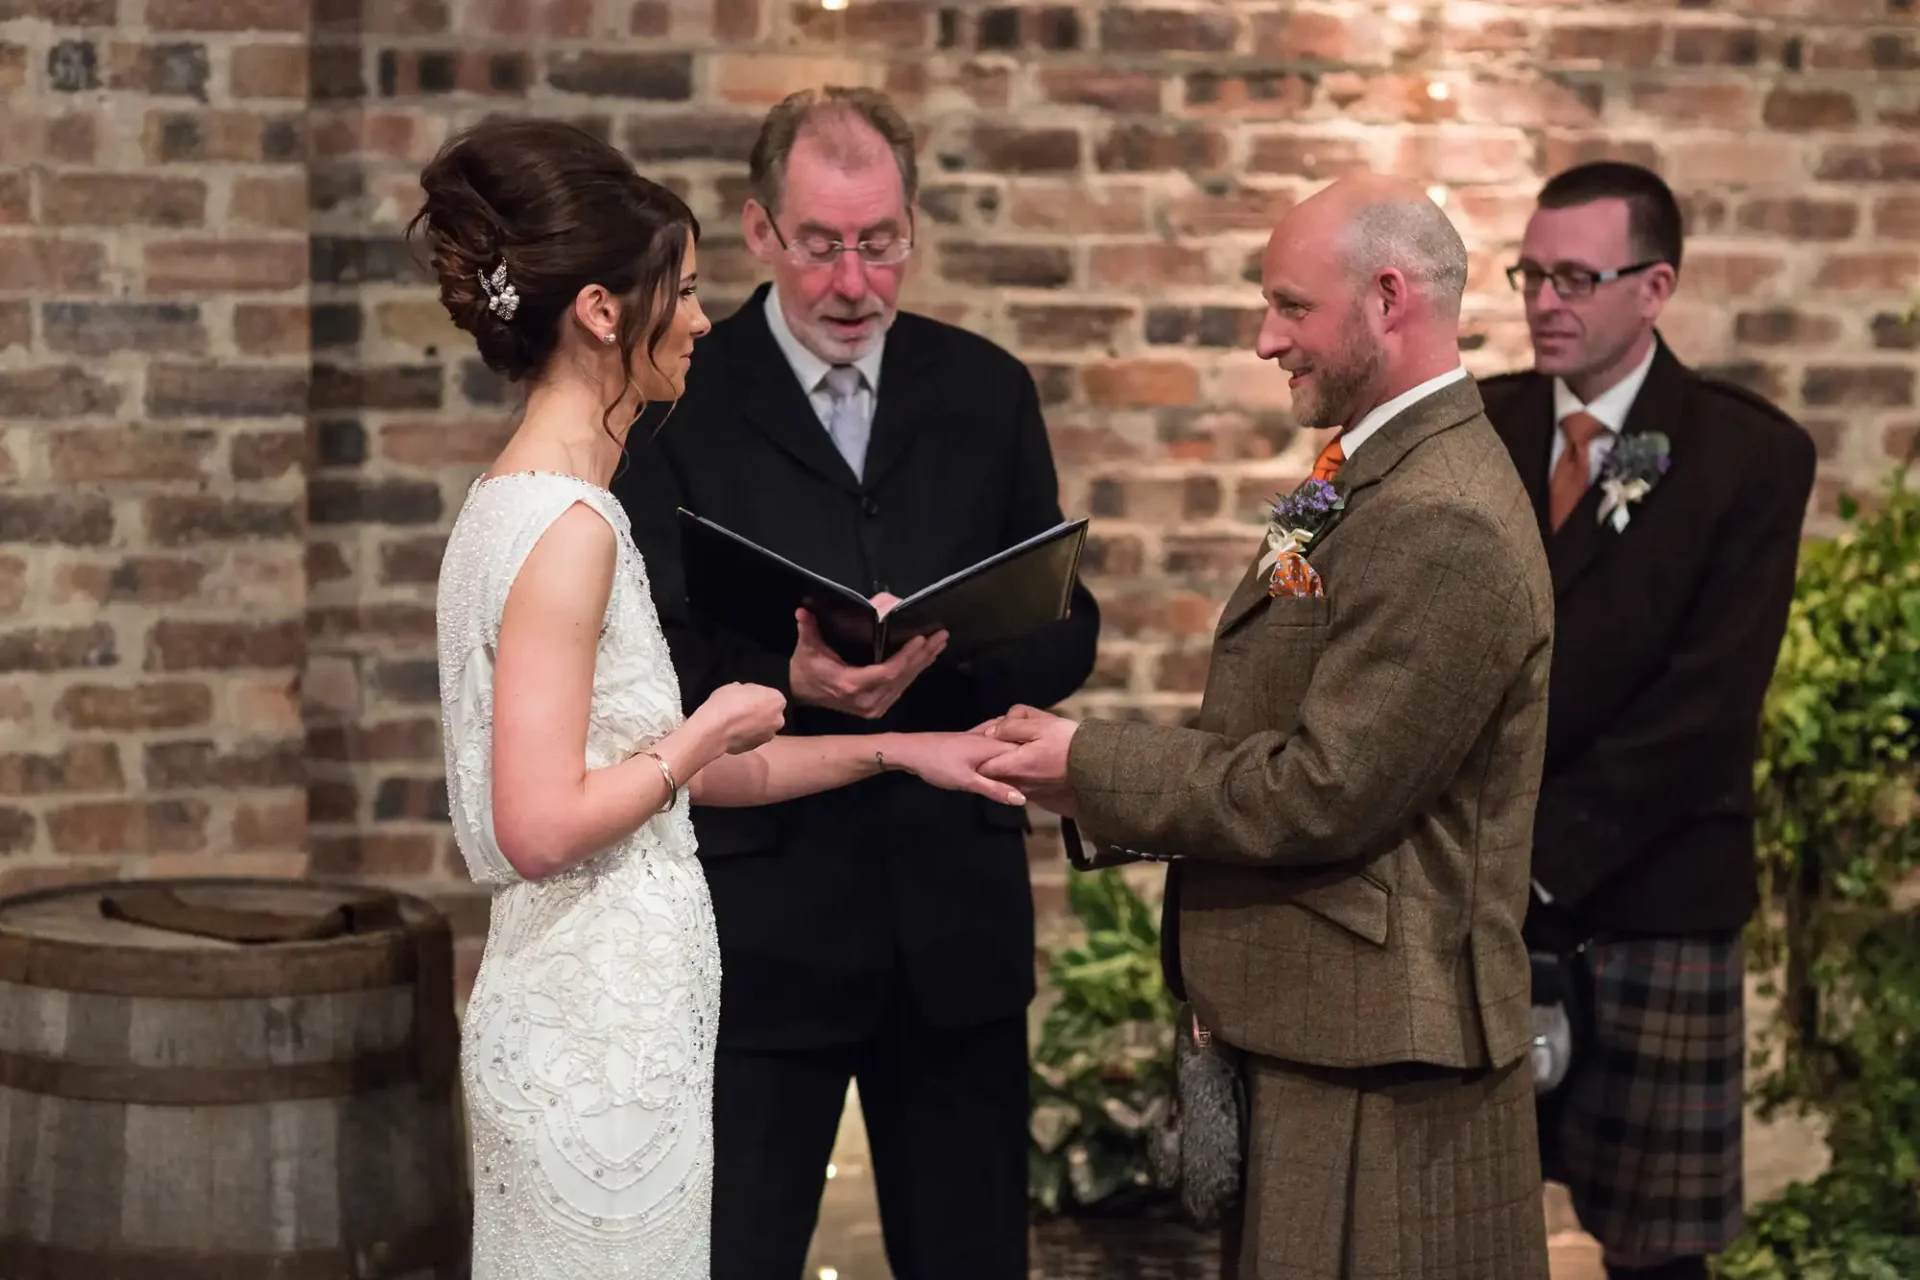 A bride and groom exchange vows at an indoor wedding ceremony, officiated by a man holding a book, with another man observing in the background.